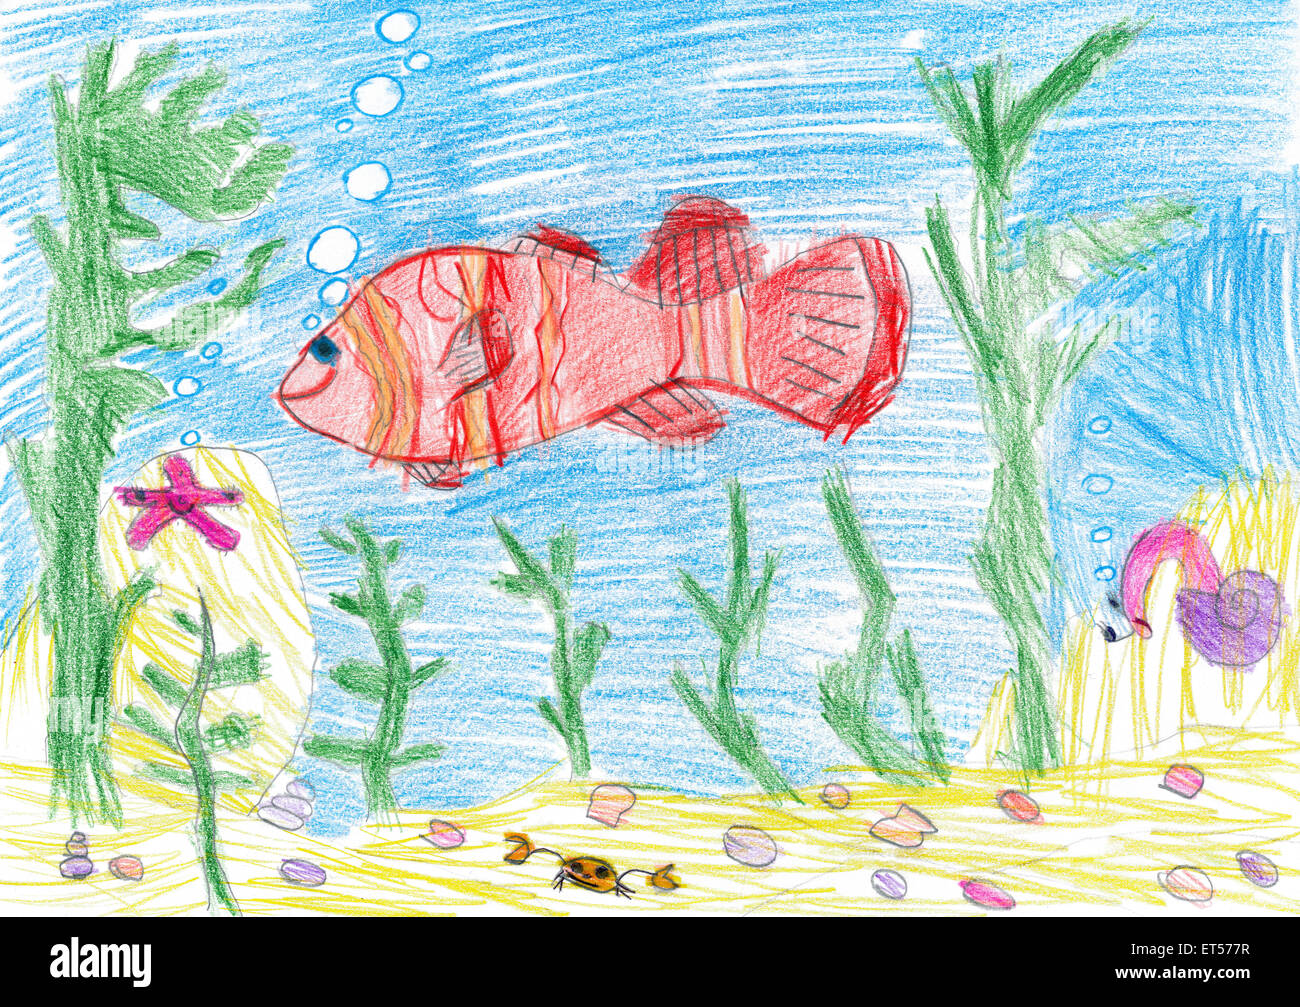 How to Draw an Underwater Scenehow to Draw an Underwater Scene - DrawingNow